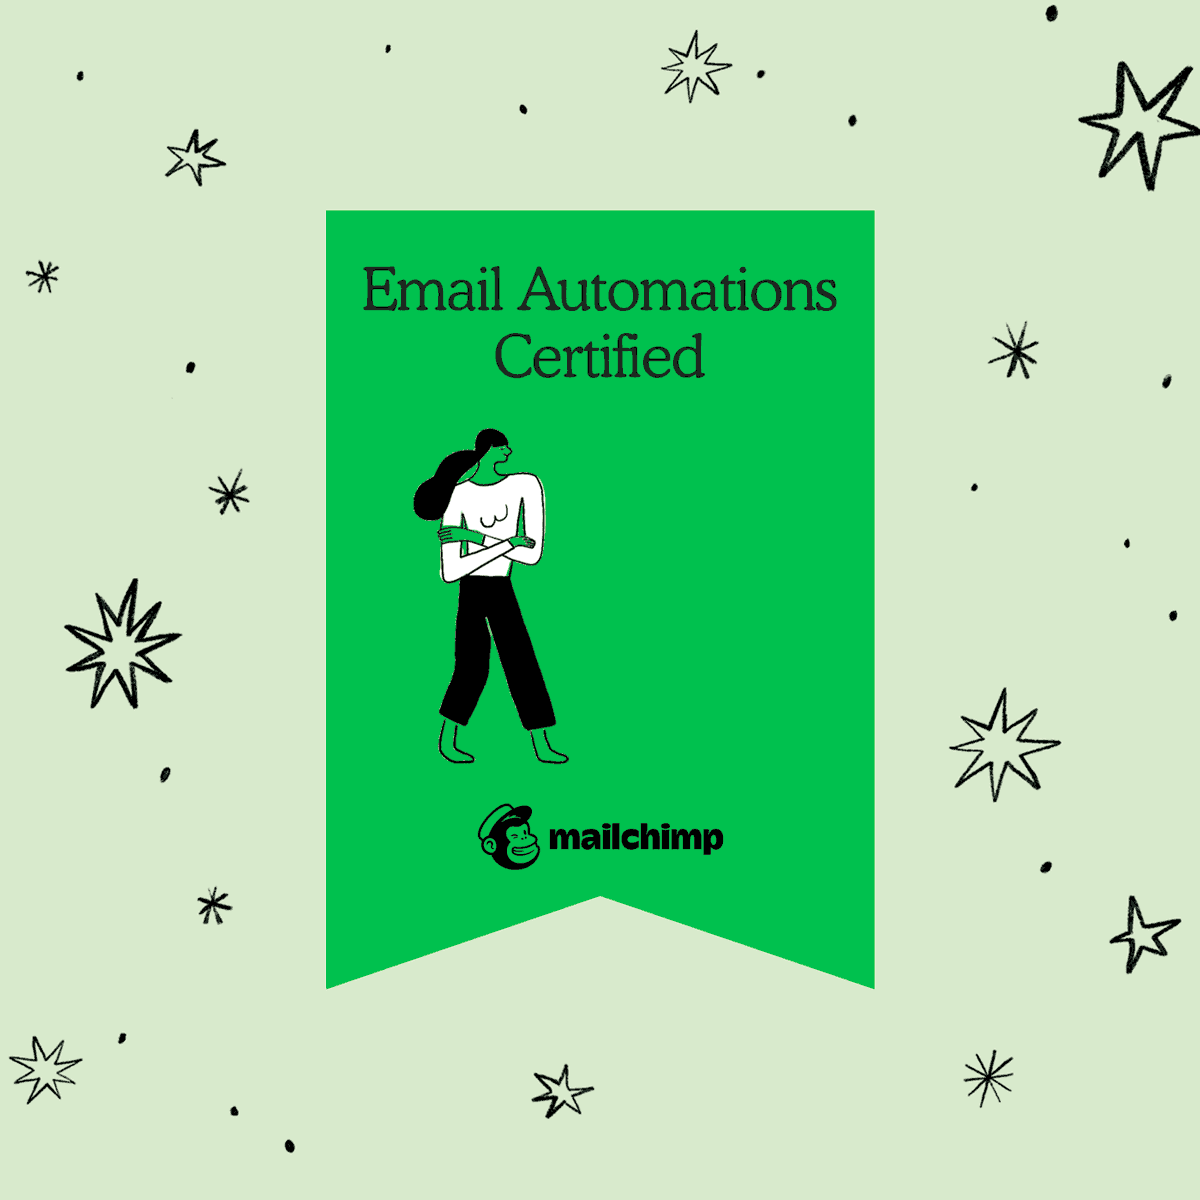 Mailchimp Email Automations Certification